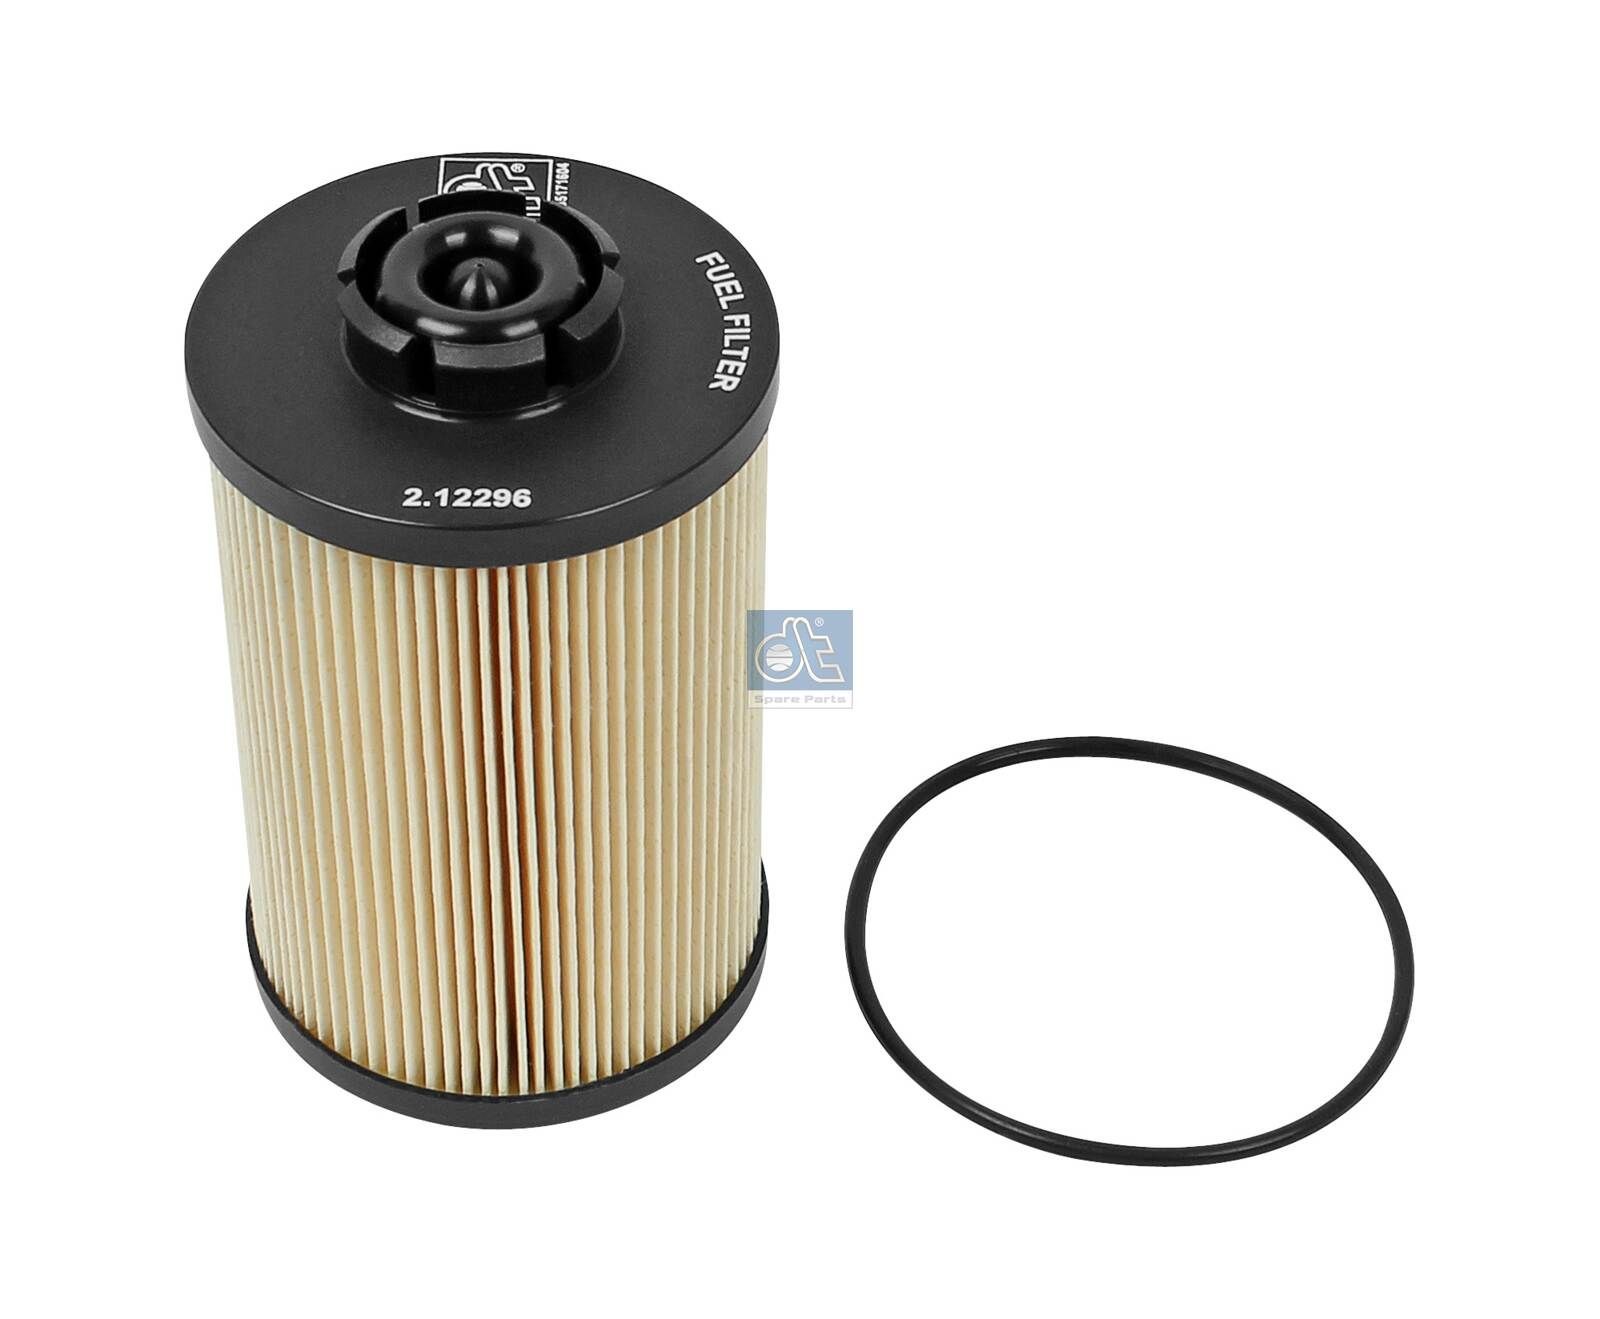 PU 1058X DT Spare Parts 2.12296 Fuel filter 74 20 796 772